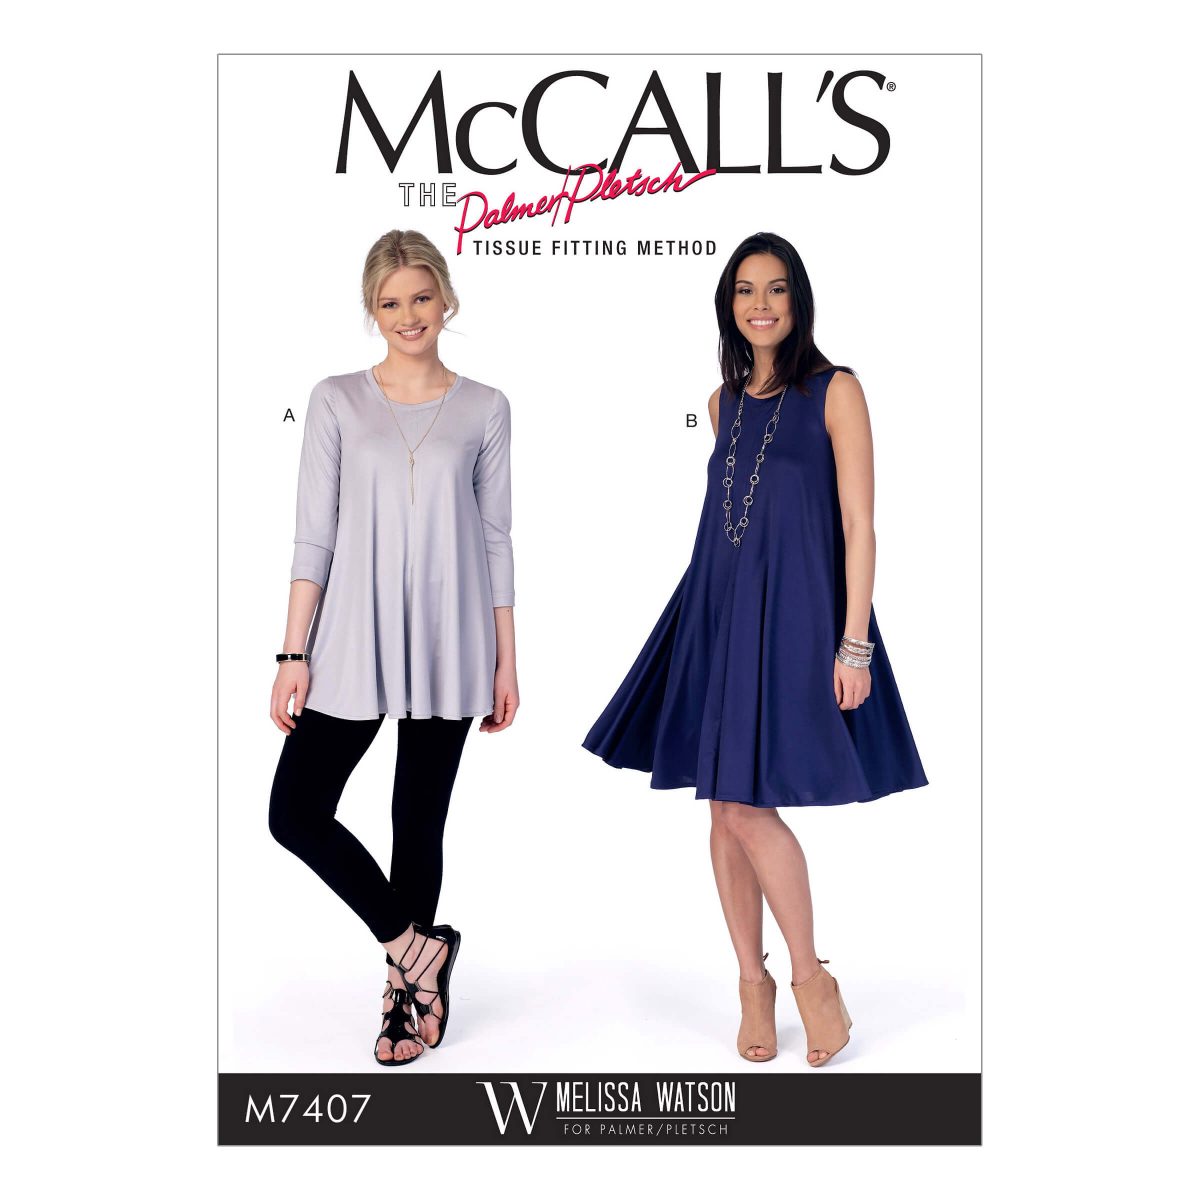 McCall's Sewing Pattern M7407 Misses' Top and Dress